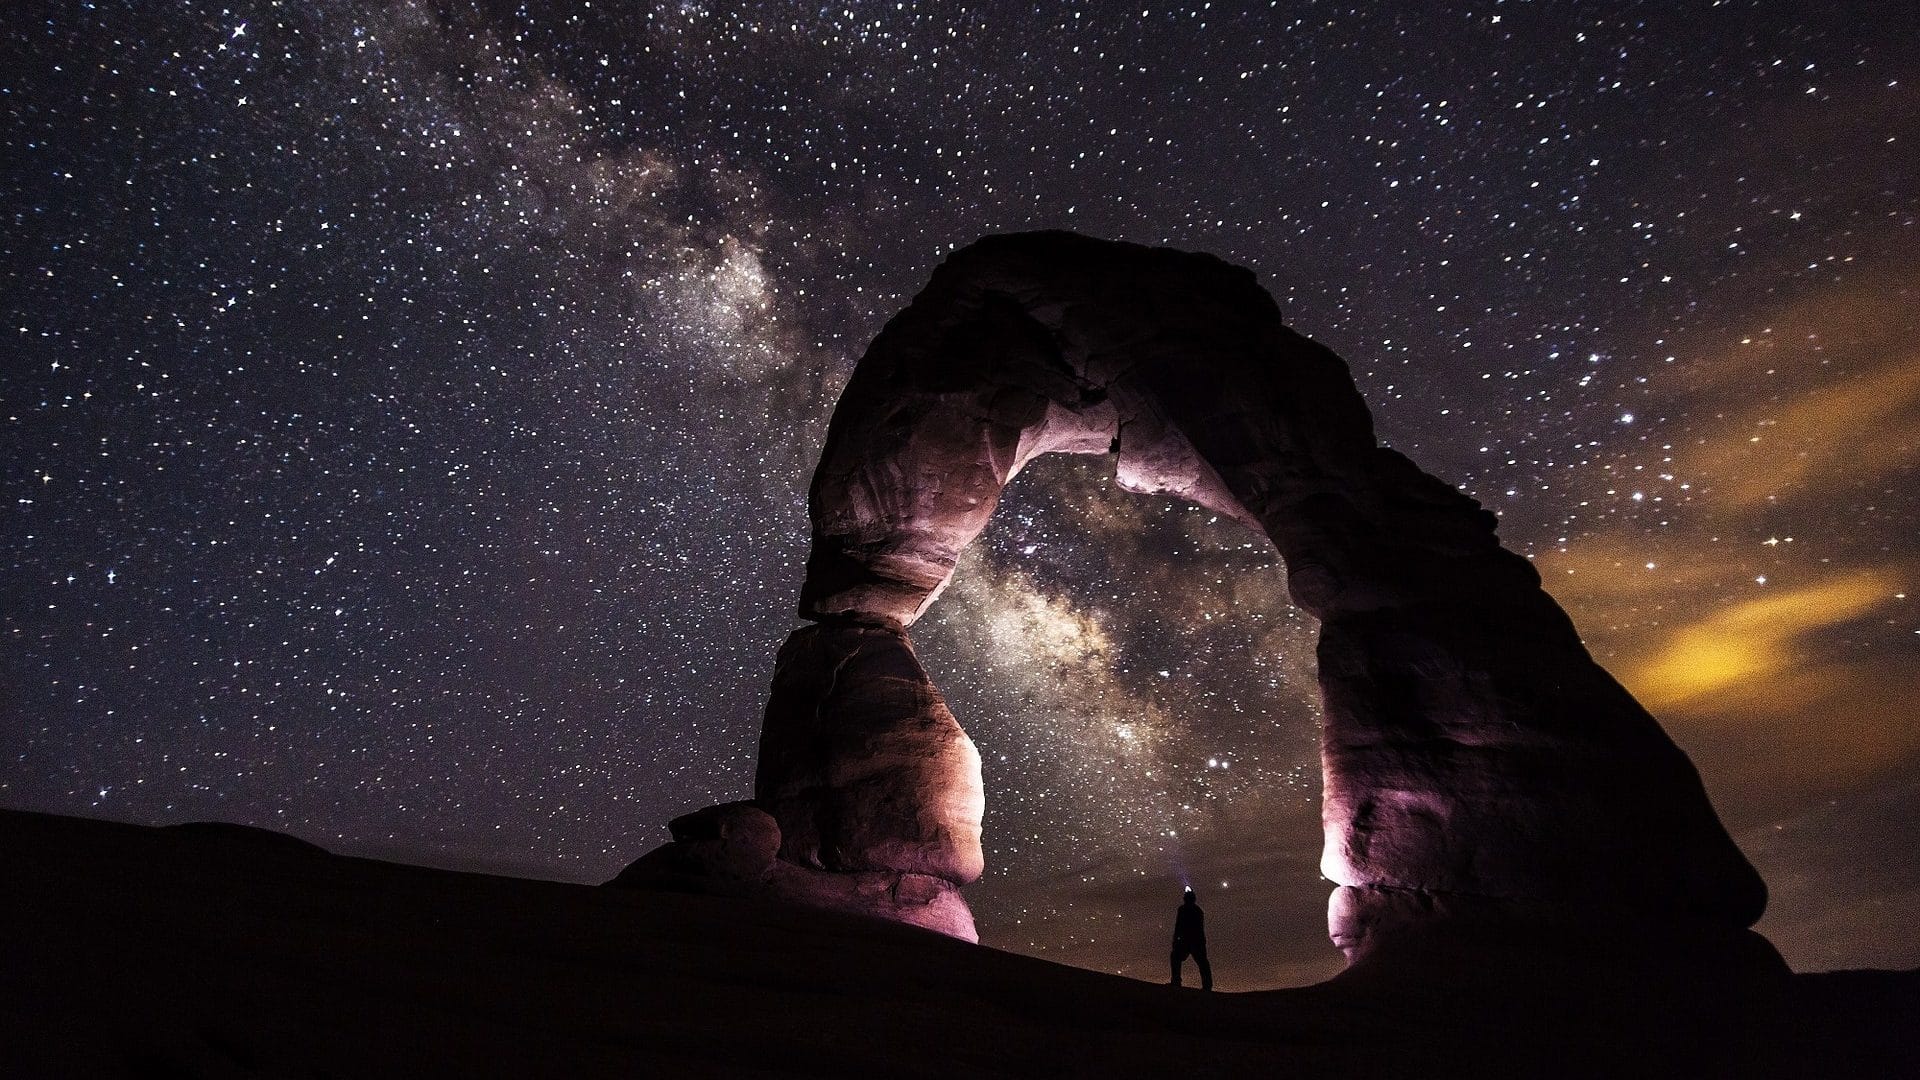 Image: Man standing underneath a rock arch looking up at the stars of the night sky